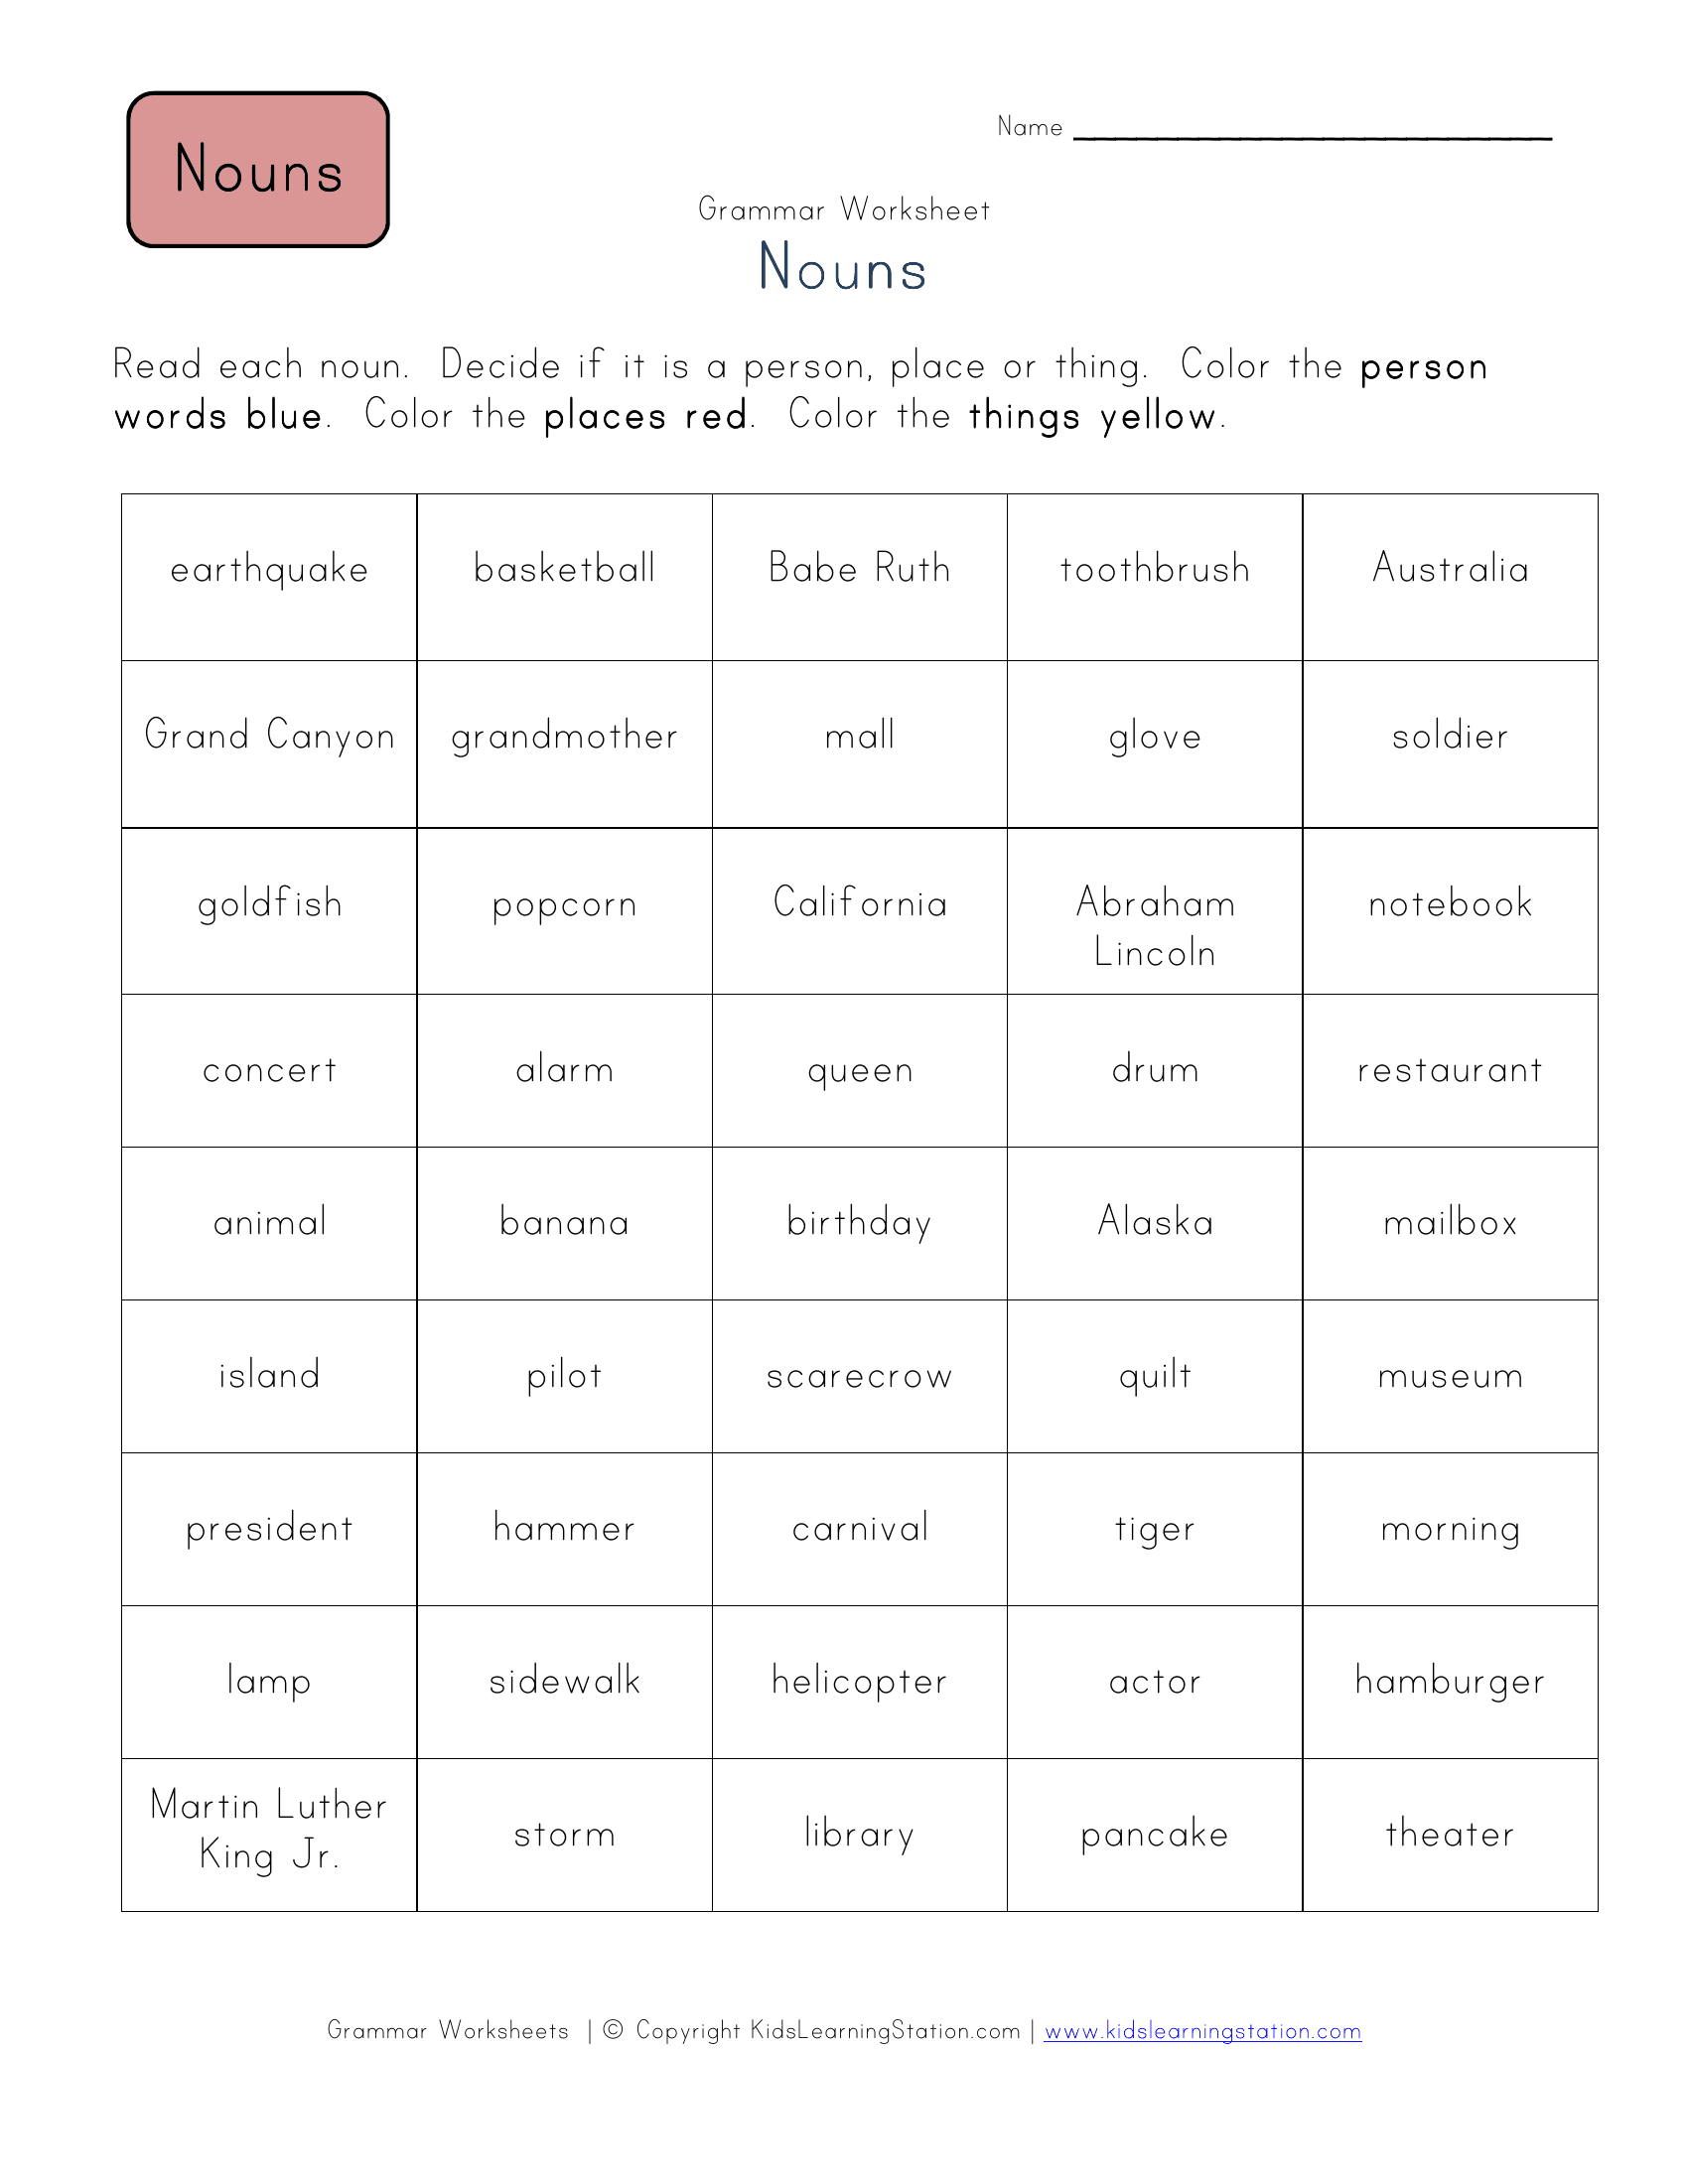 nouns-fill-in-the-blank-4-worksheet-zone